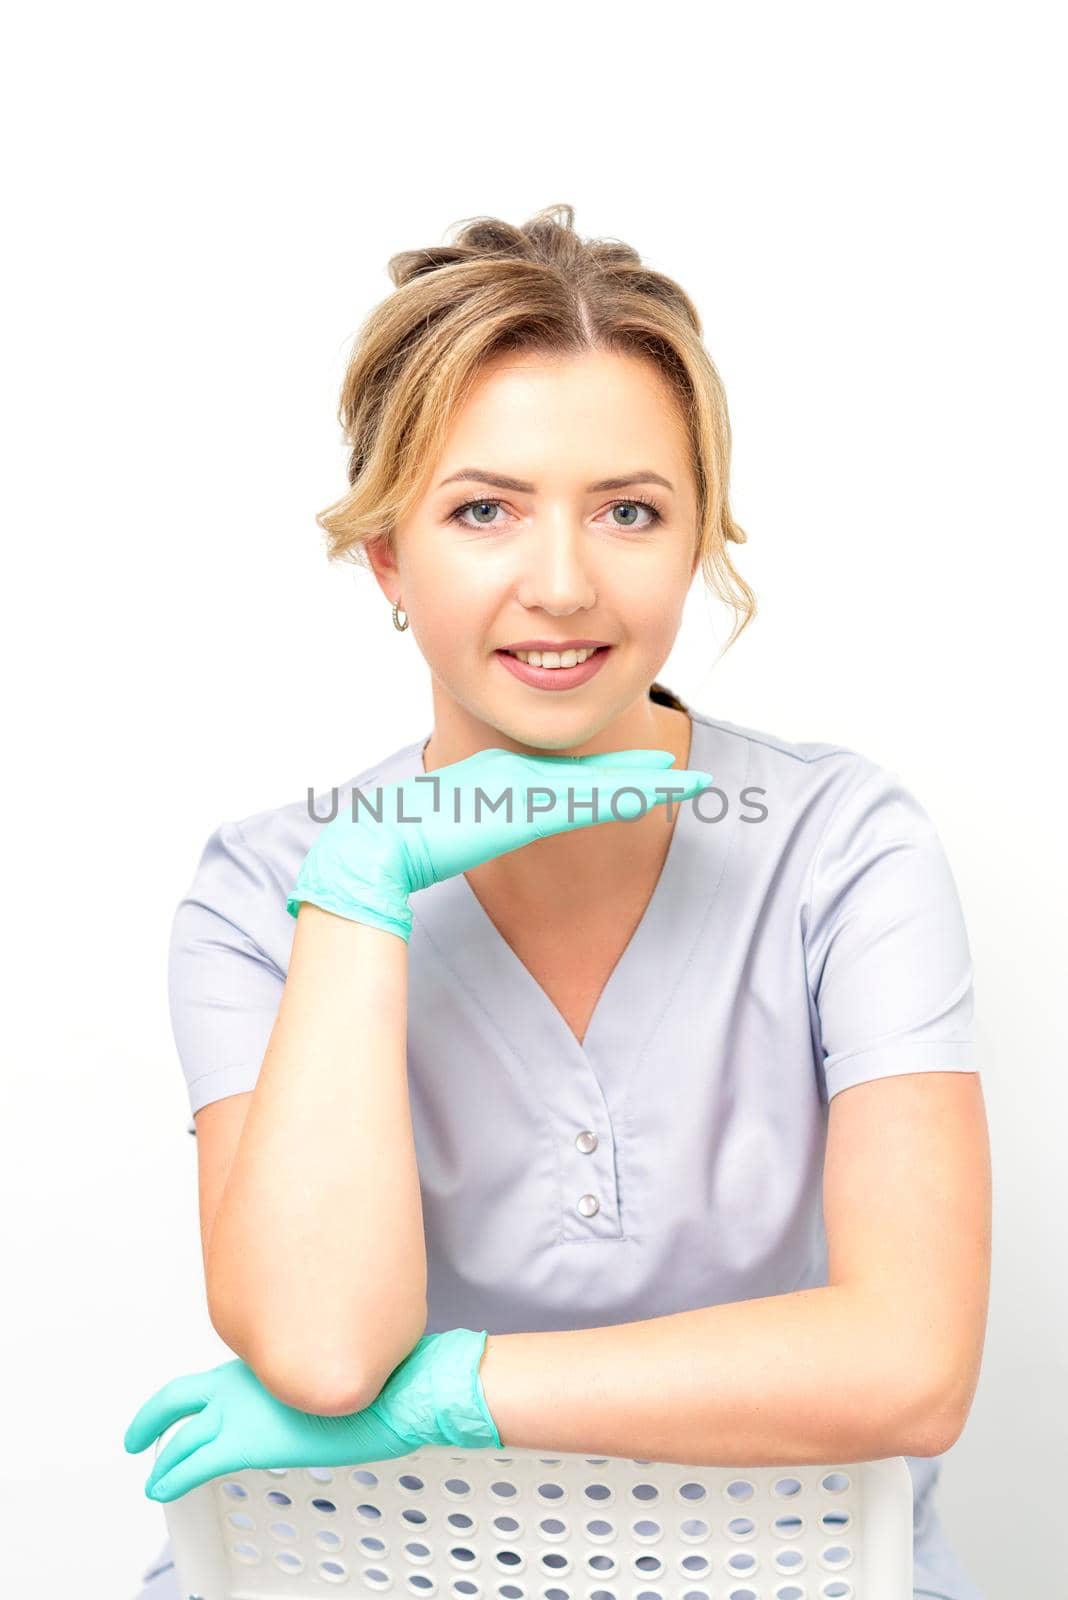 Close-up portrait of young smiling female caucasian healthcare worker sitting and staring at the camera wearing gloves on white background